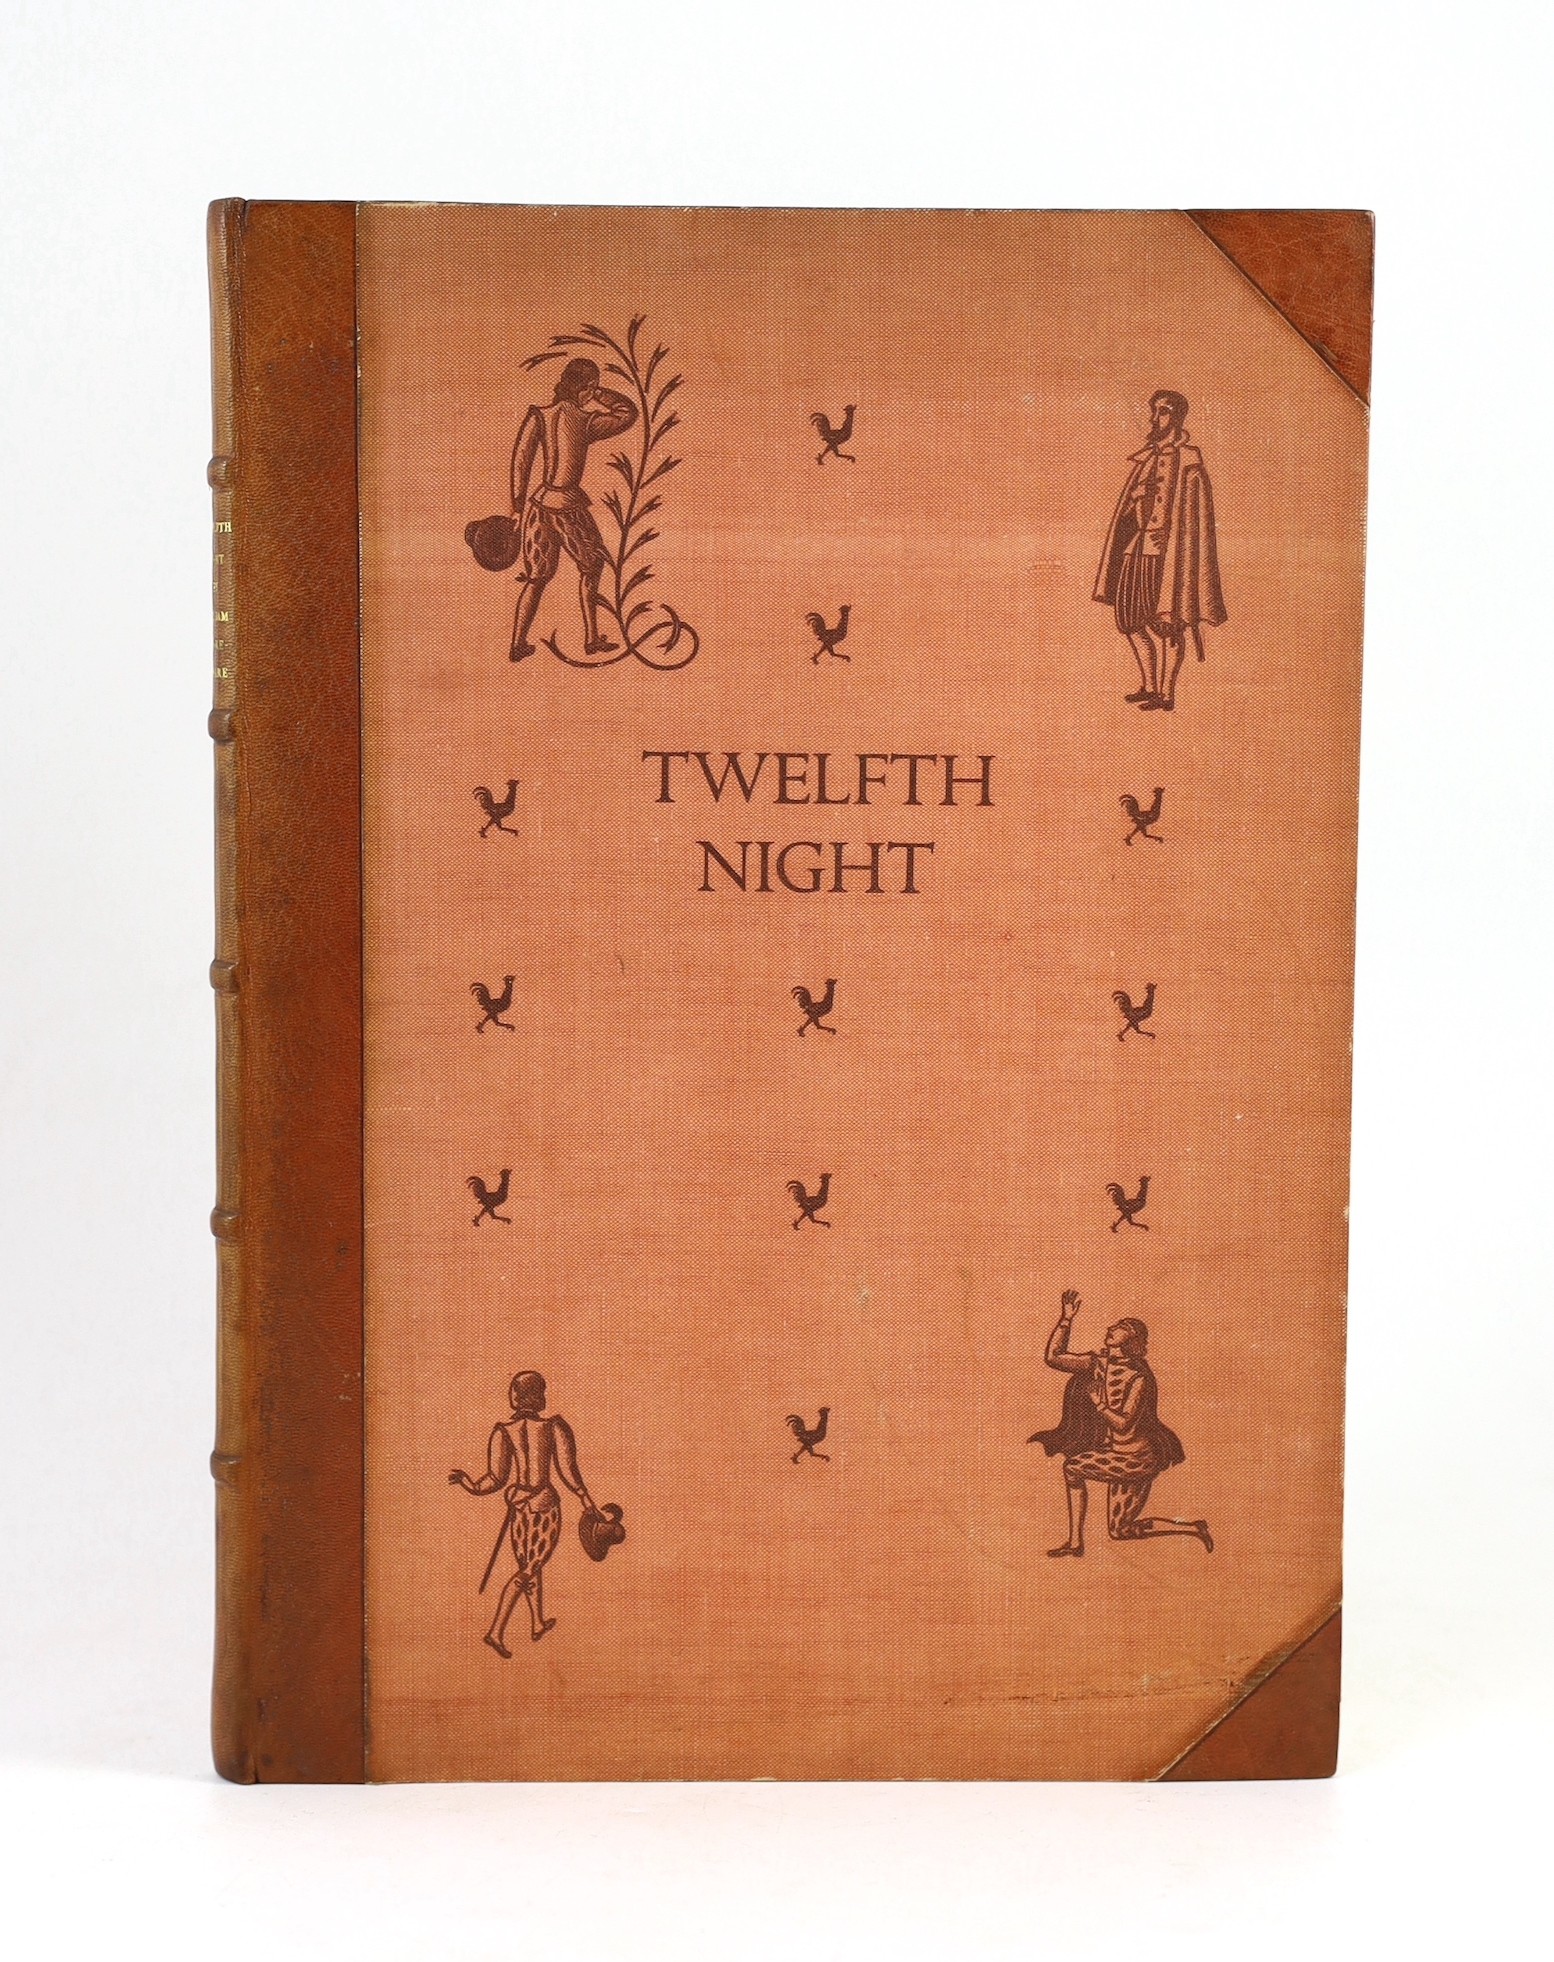 Golden Cockerel Press - Shakespeare, William - Twelfth Night, number 87 of 275, illustrated with 30 wood-engravings, including title, by Eric Ravilious, 4to, half brown morocco by Sangorski and Sutcliffe, bookplate of Wi